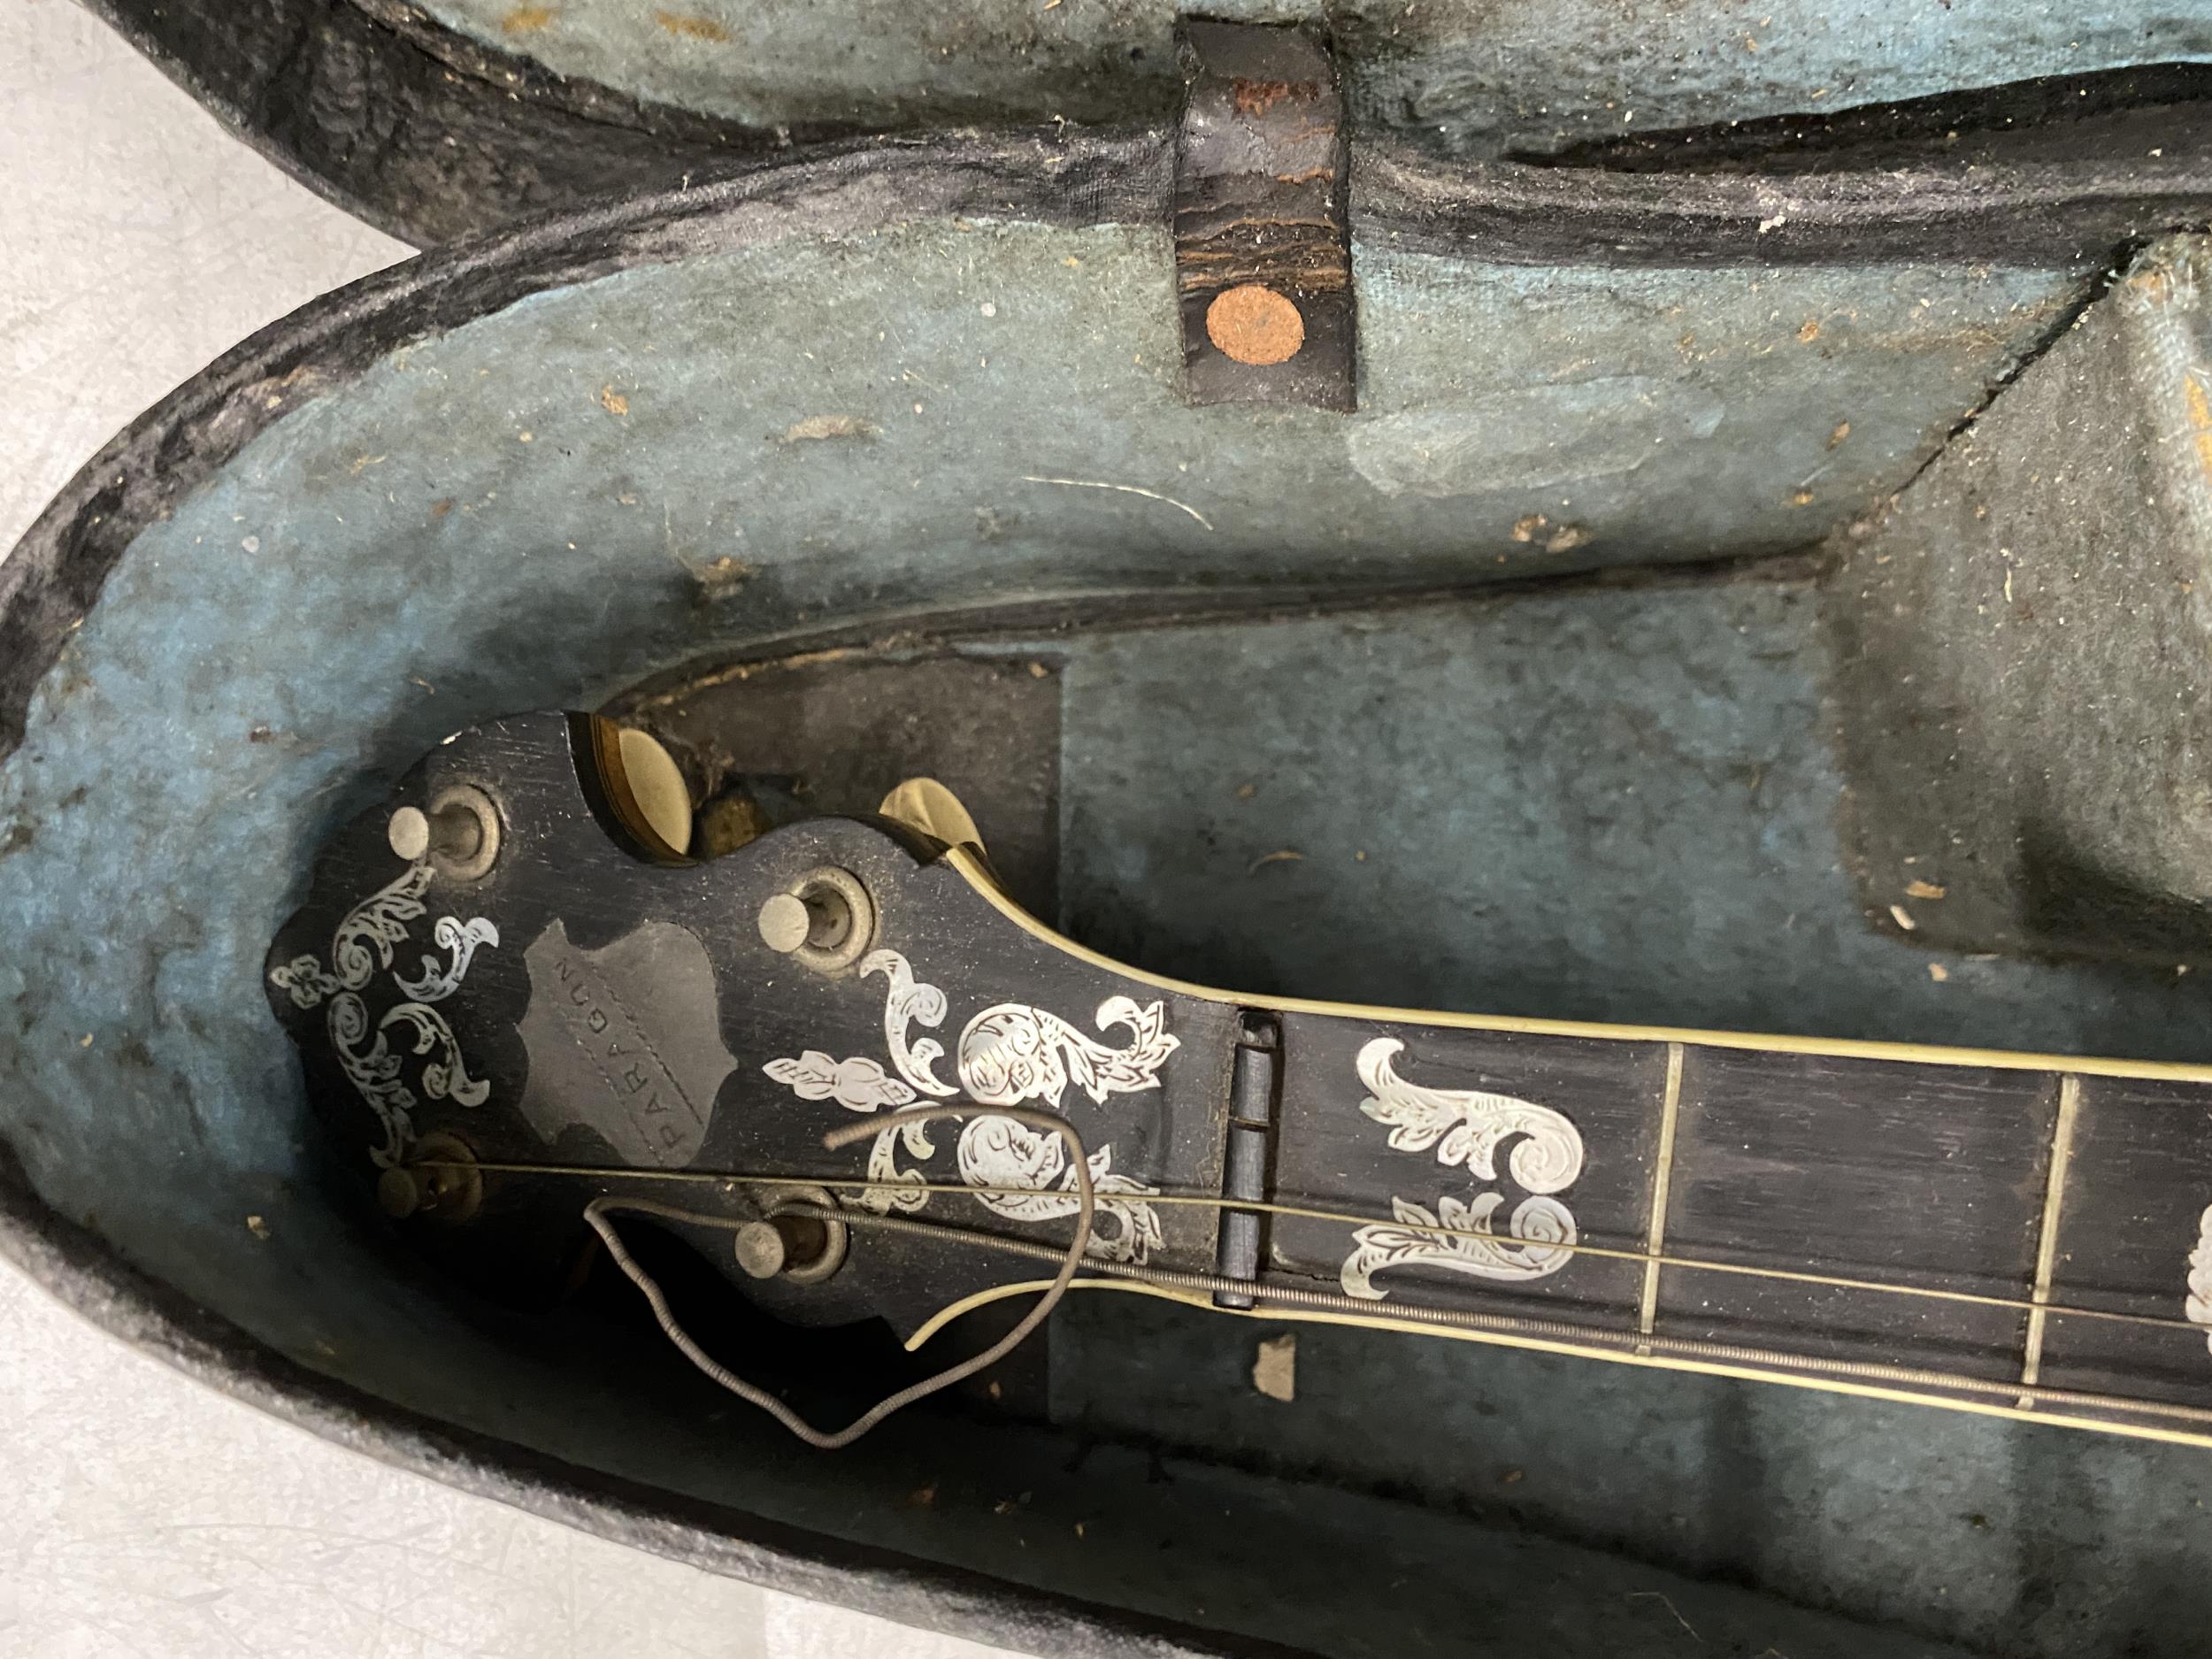 A VINTAGE CASED 'PARAGON' BANJO WITH MOTHER OF PEARL FRETBOARD - Image 3 of 5